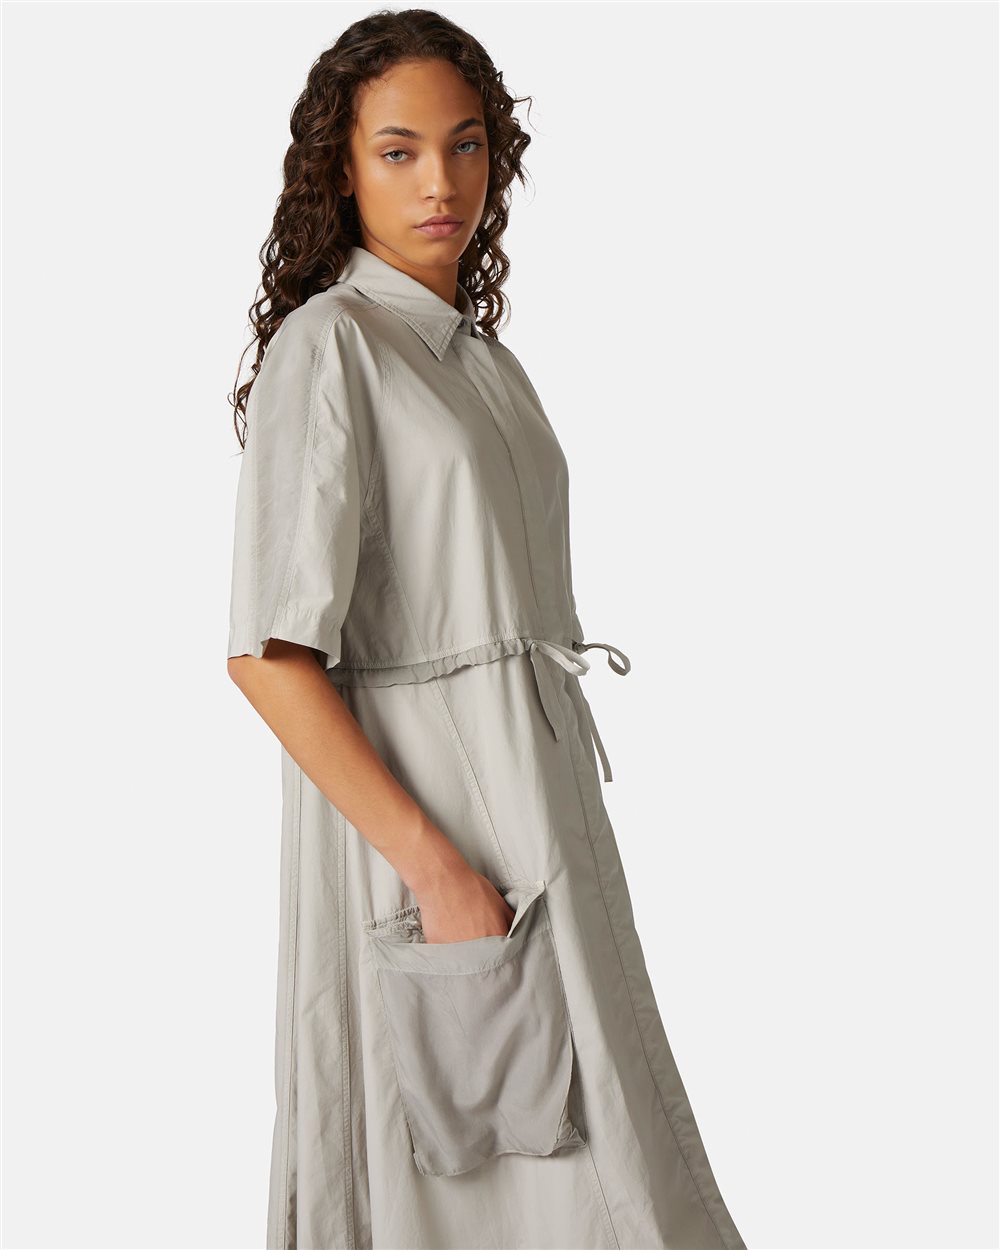 Cargo style dress with logo - Iceberg - Official Website